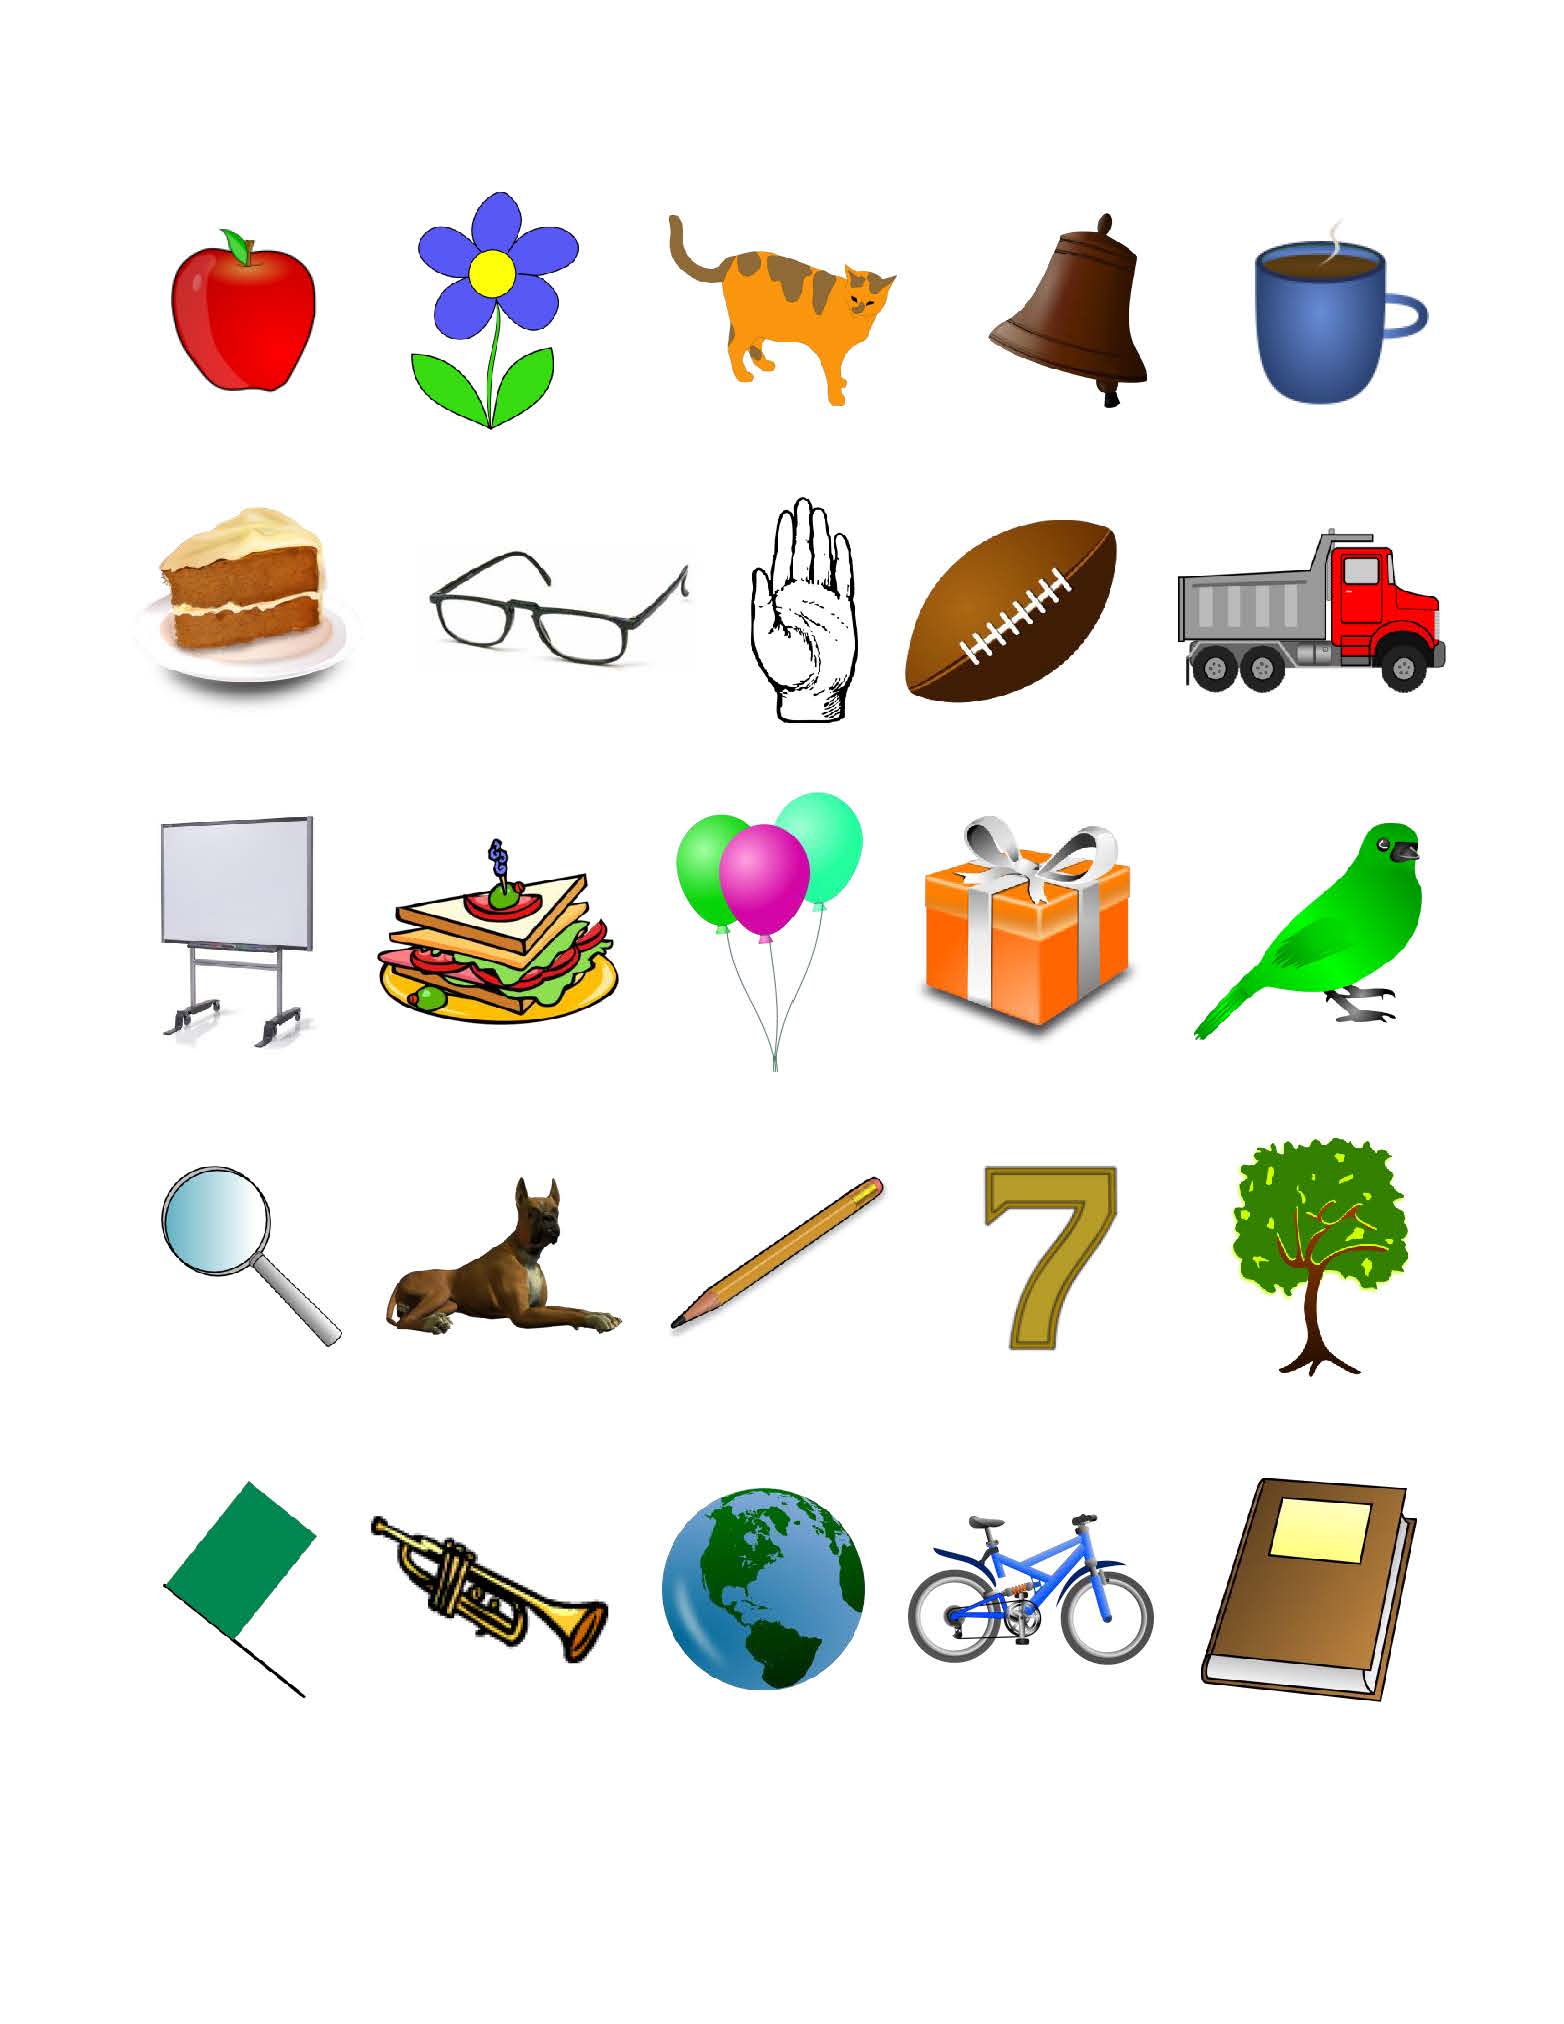 memory test - Clip Art Library